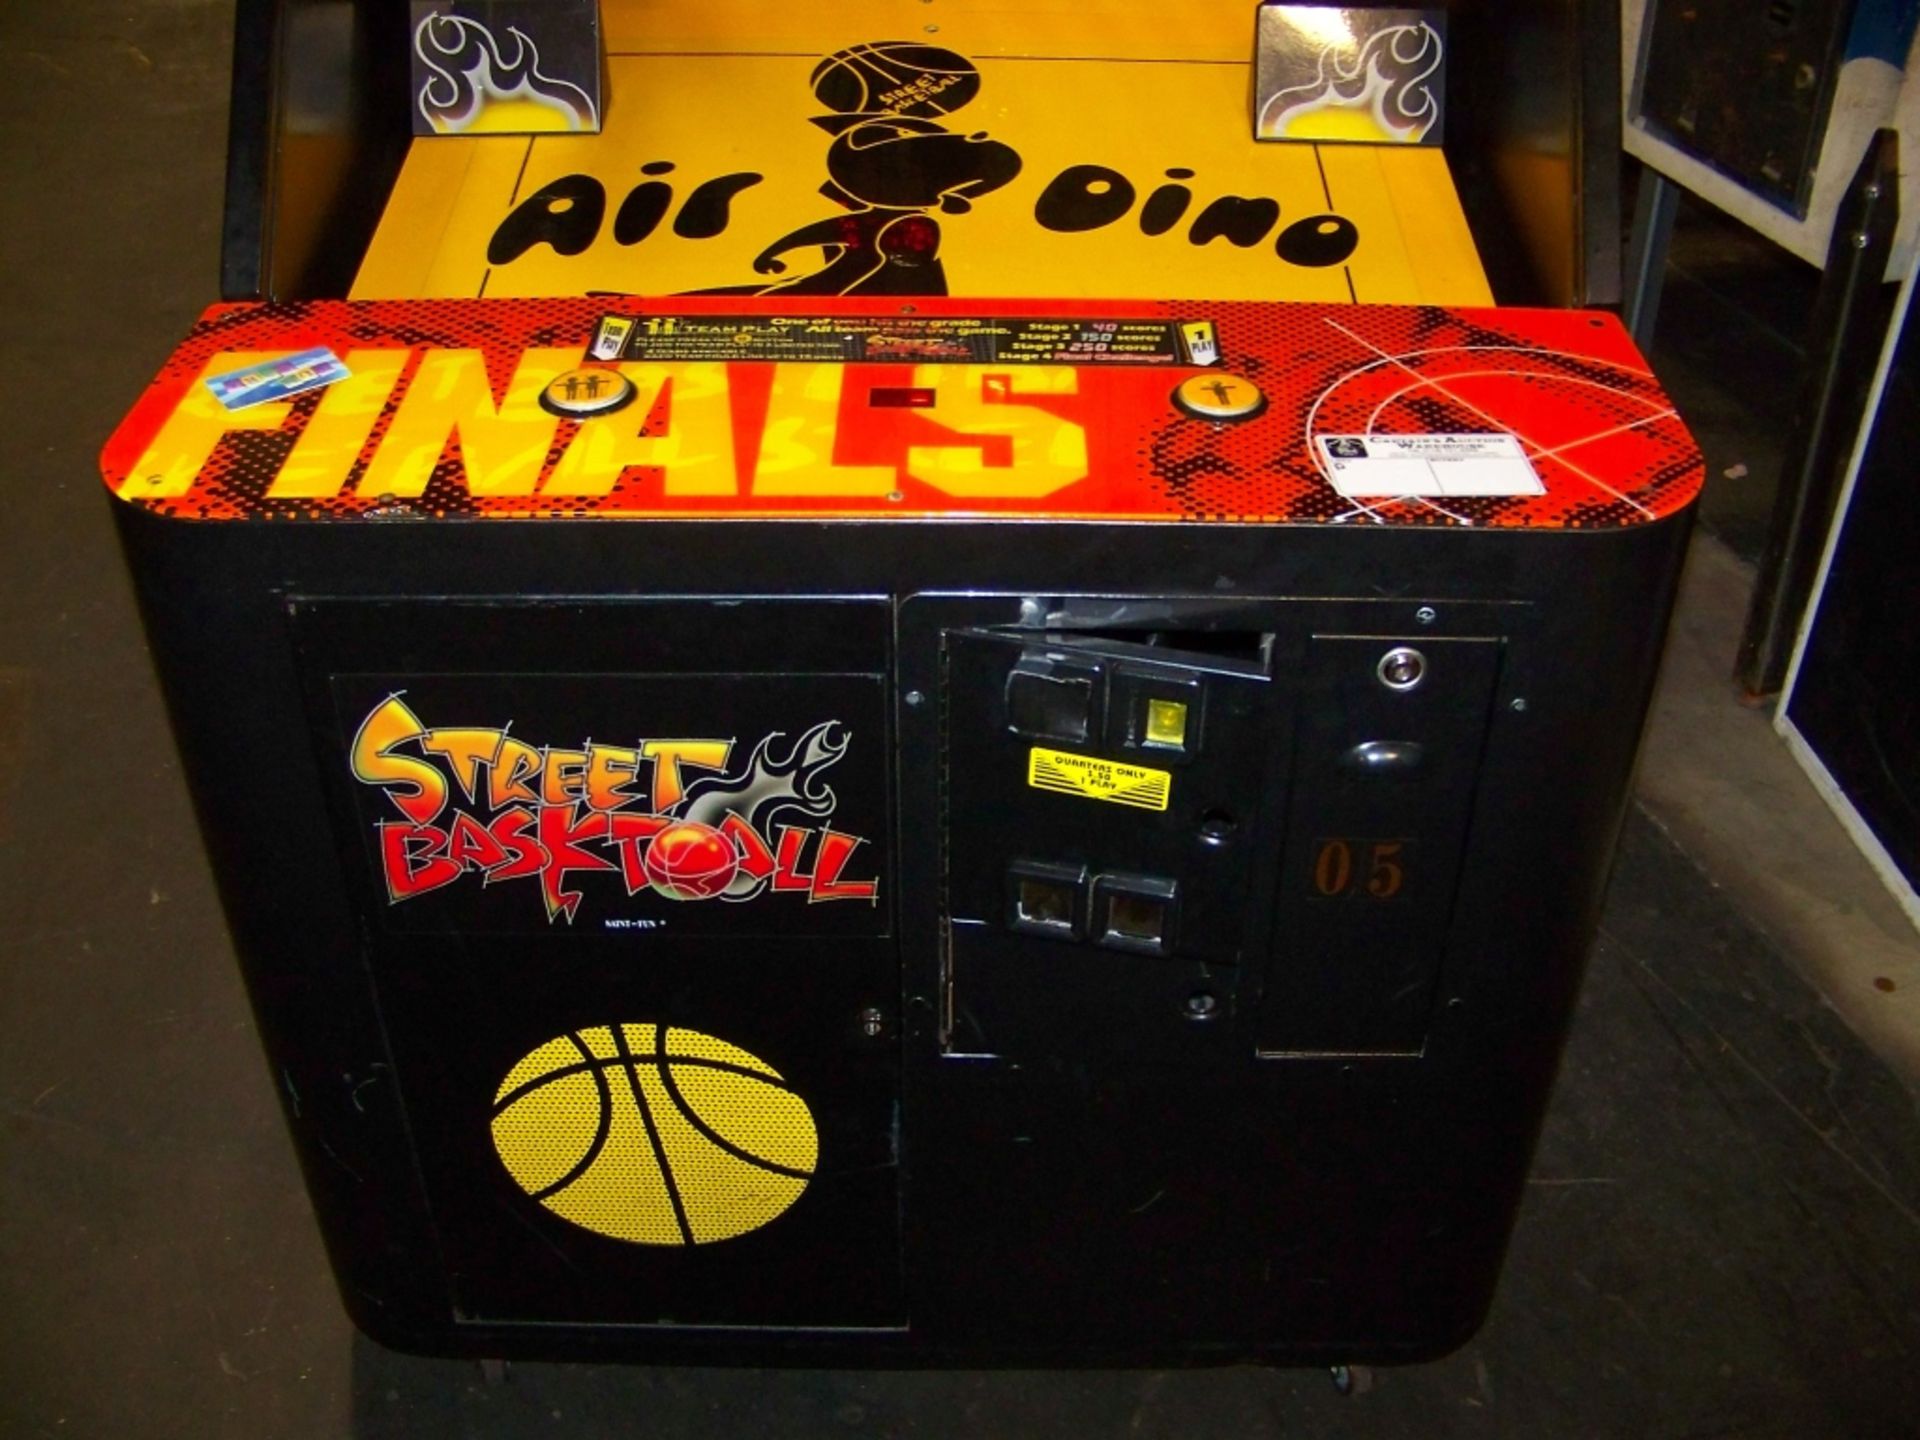 STREET BASKETBALL SPORTS REDEMPTION ARCADE GAME Item is in used condition. Evidence of wear and - Image 6 of 7